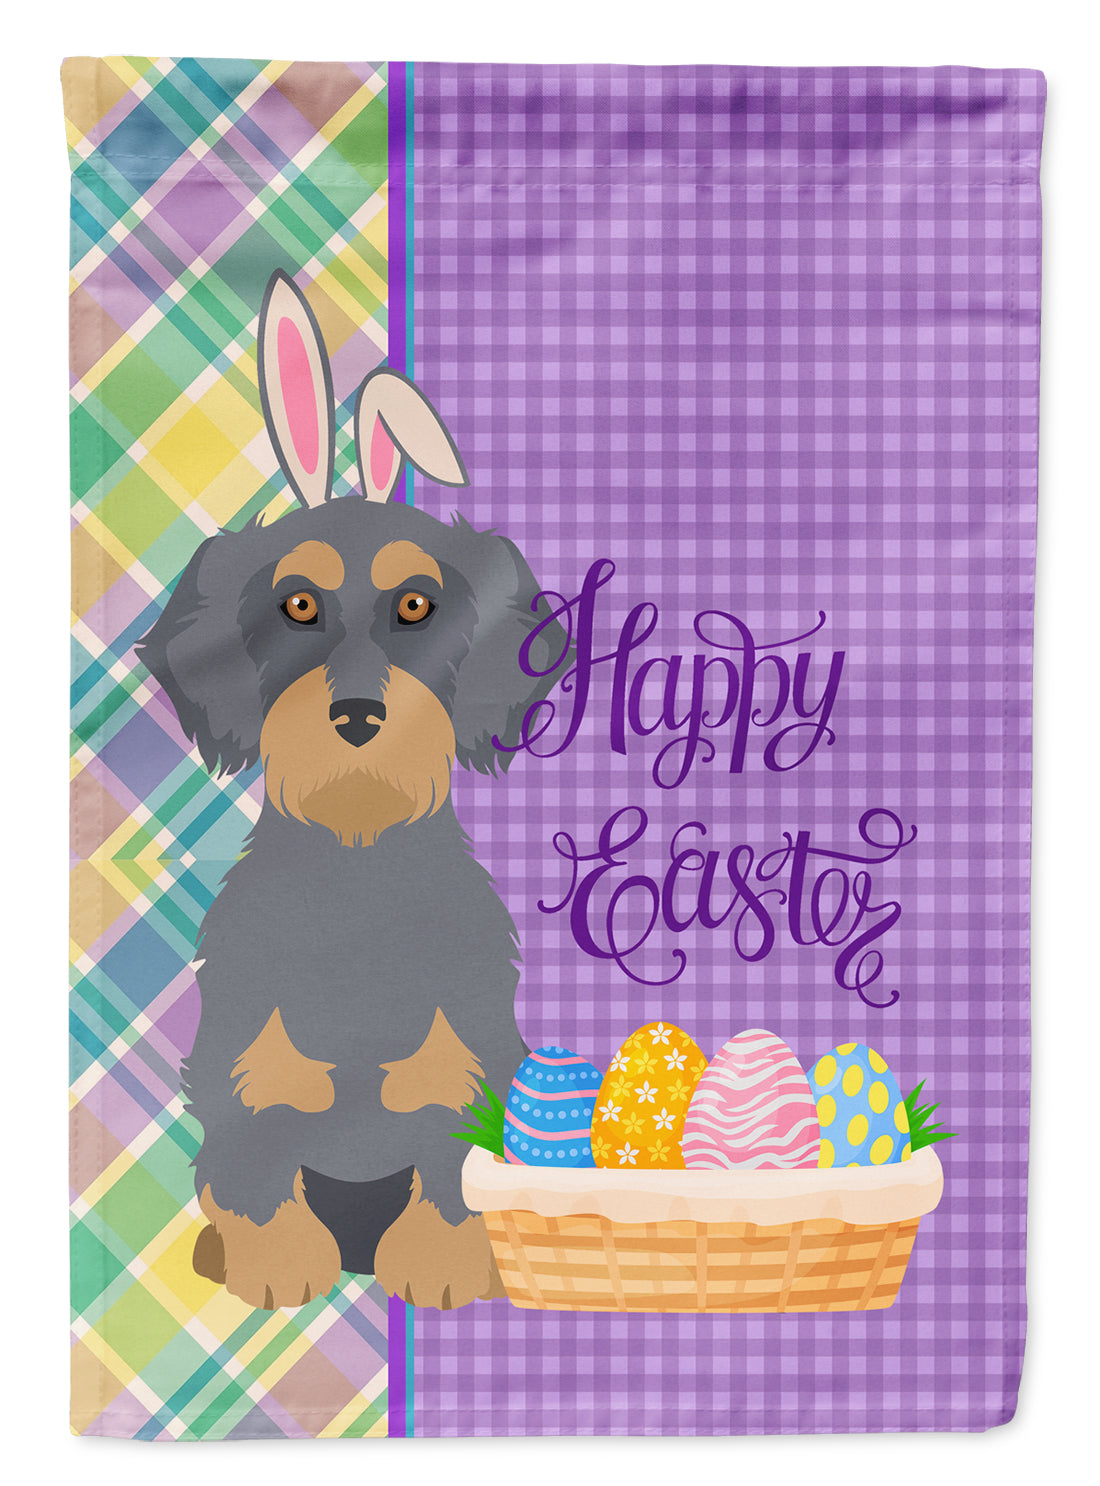 Wirehair Blue and Tan Dachshund Easter Flag Garden Size